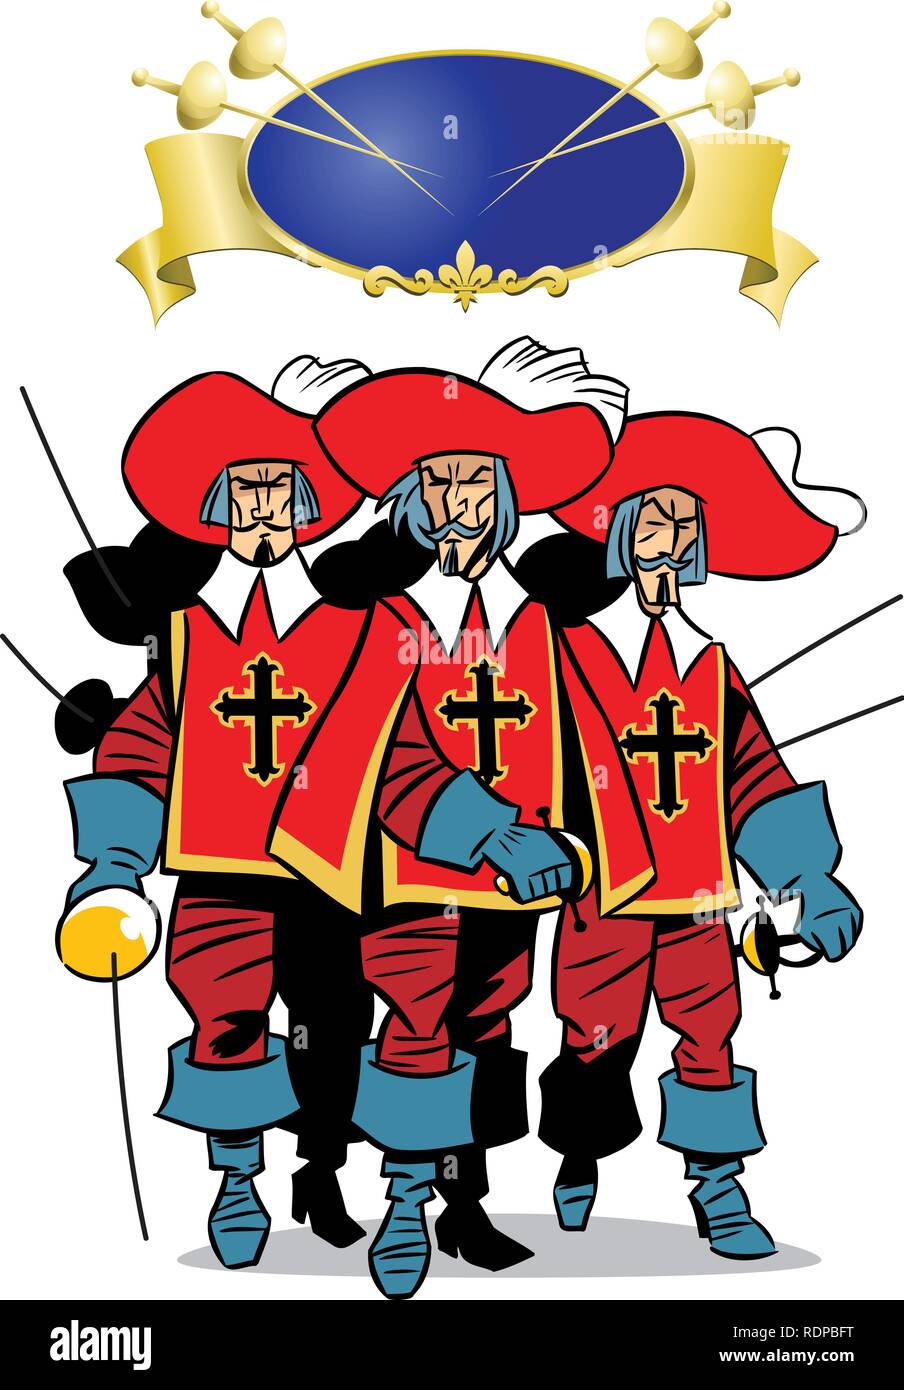 The illustration shows three musketeers in comic style. Stock Vector